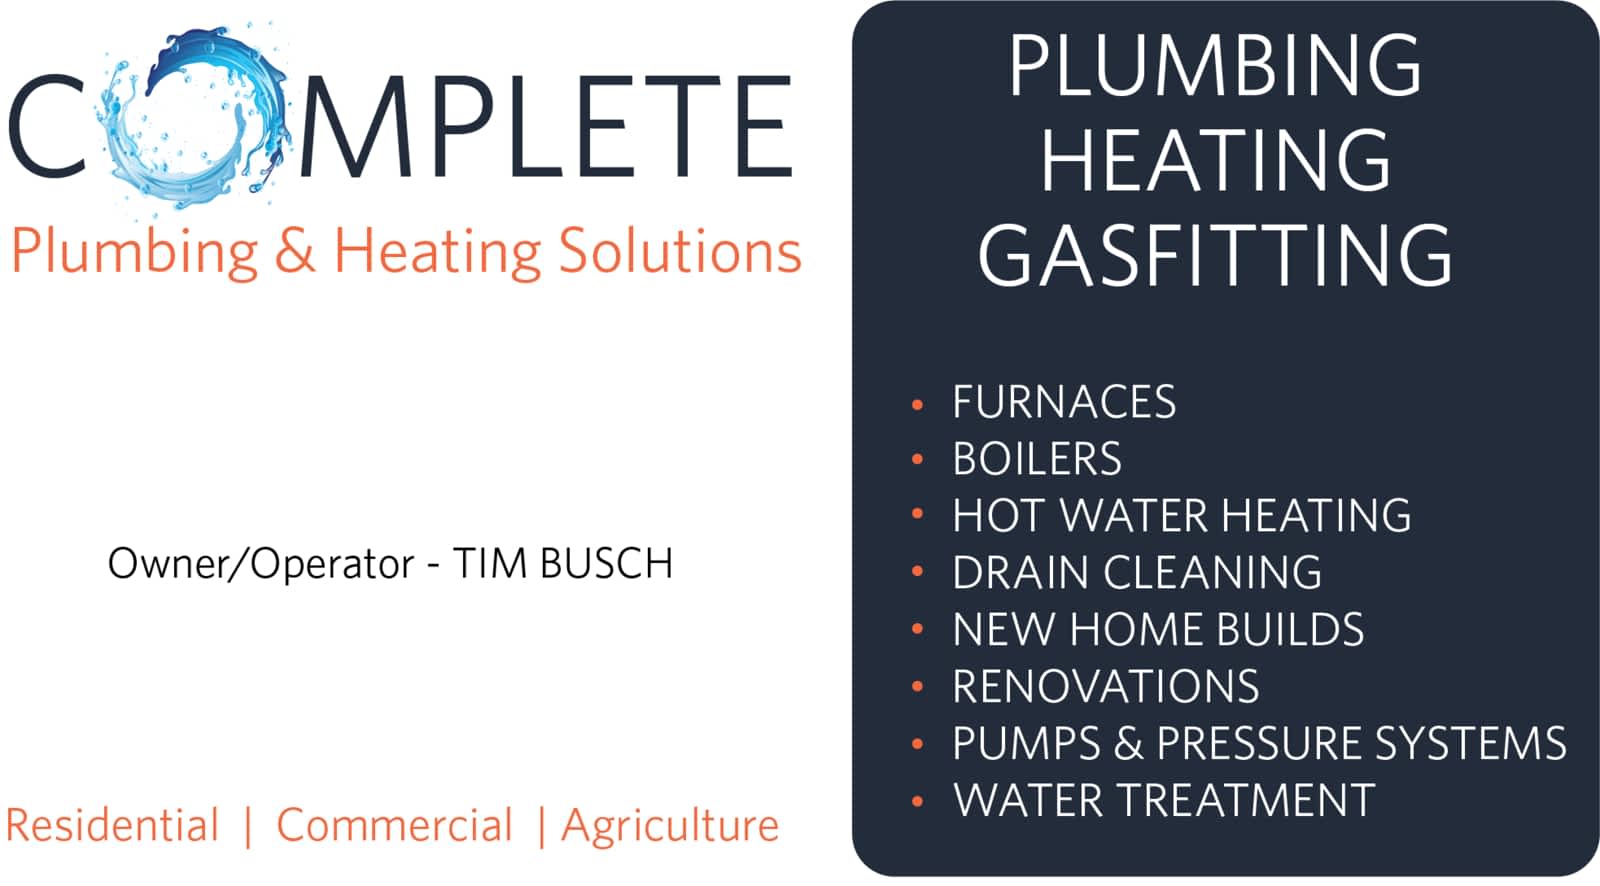 Complete Plumbing and Heating Solutions 8 Aspen Heights Way, Innisfail Alberta T4G 1Y5